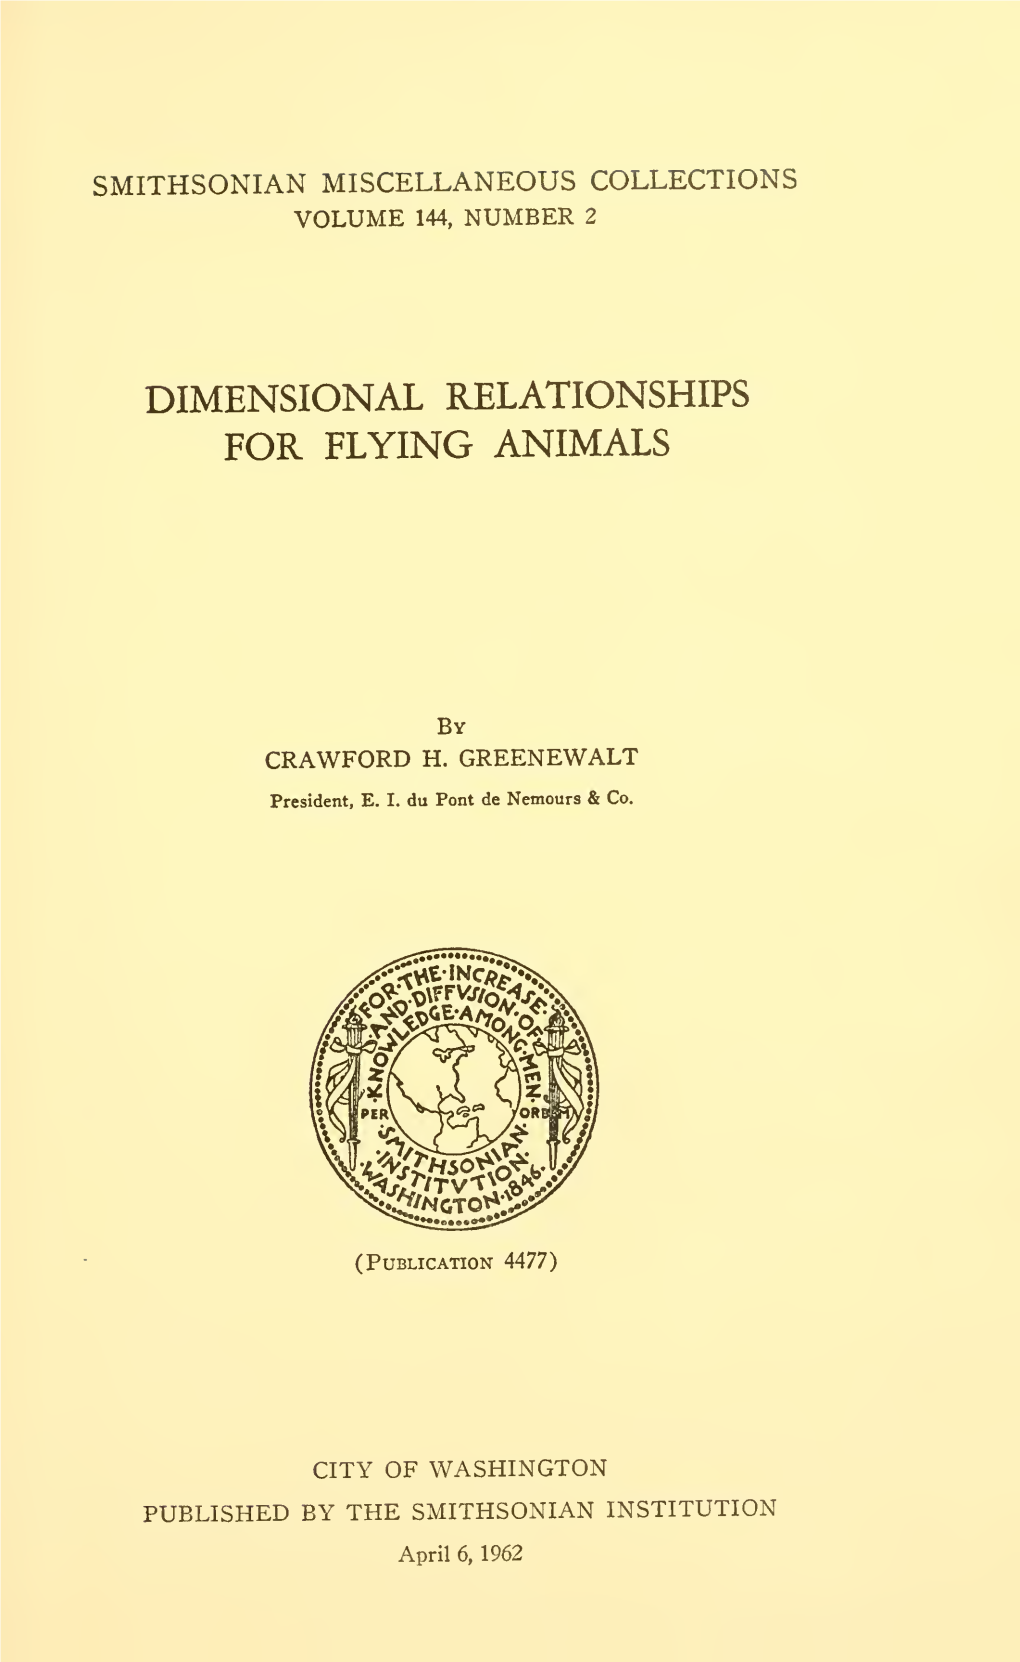 Dimensional Relationships for Flying Animals